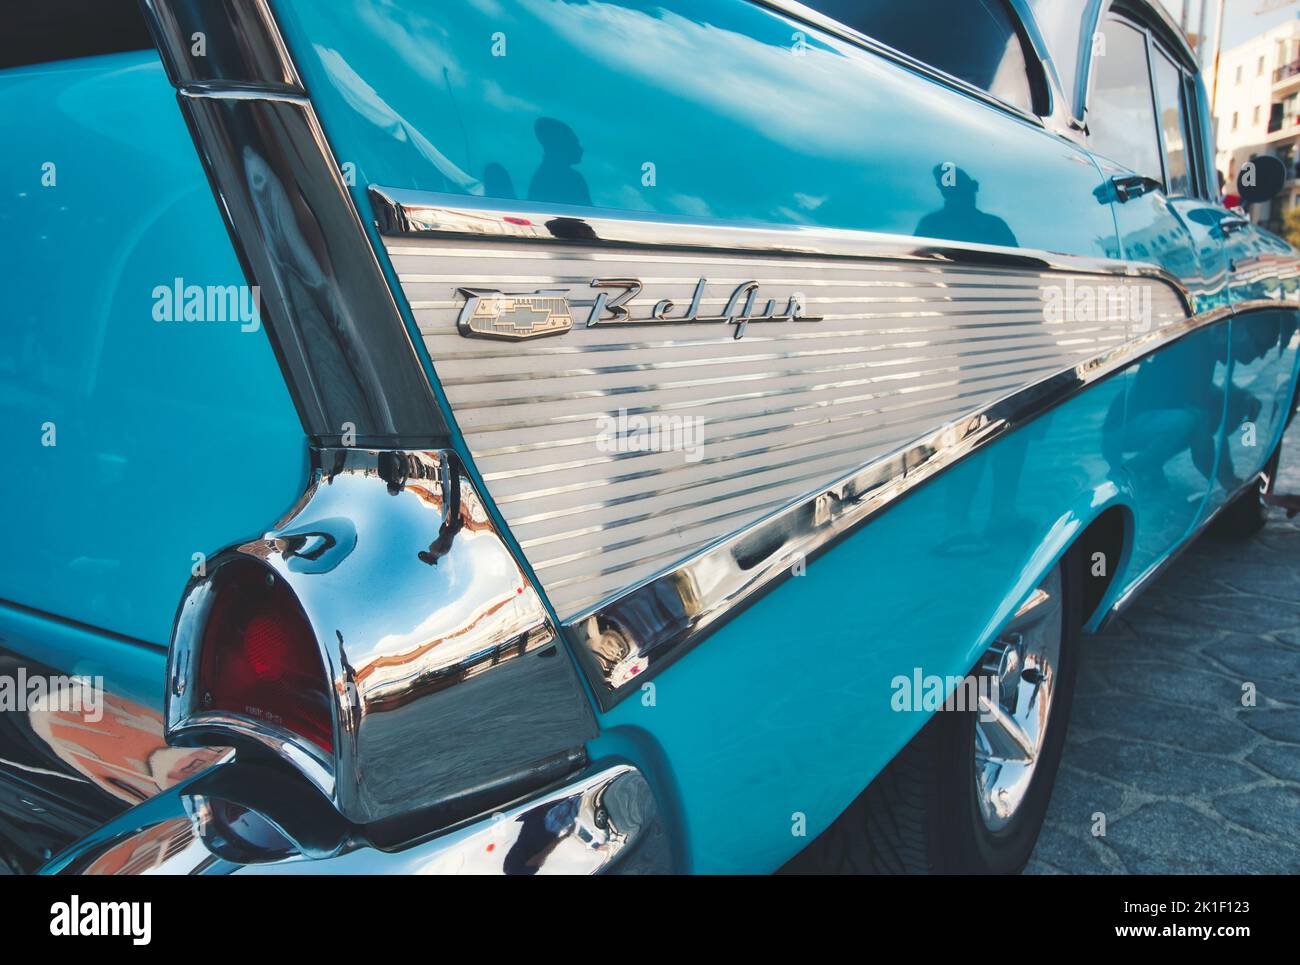 Closeup of the rear side of an aqua marine blue 1957 Chevrolet Bel Air with bullet bumper guards Stock Photo